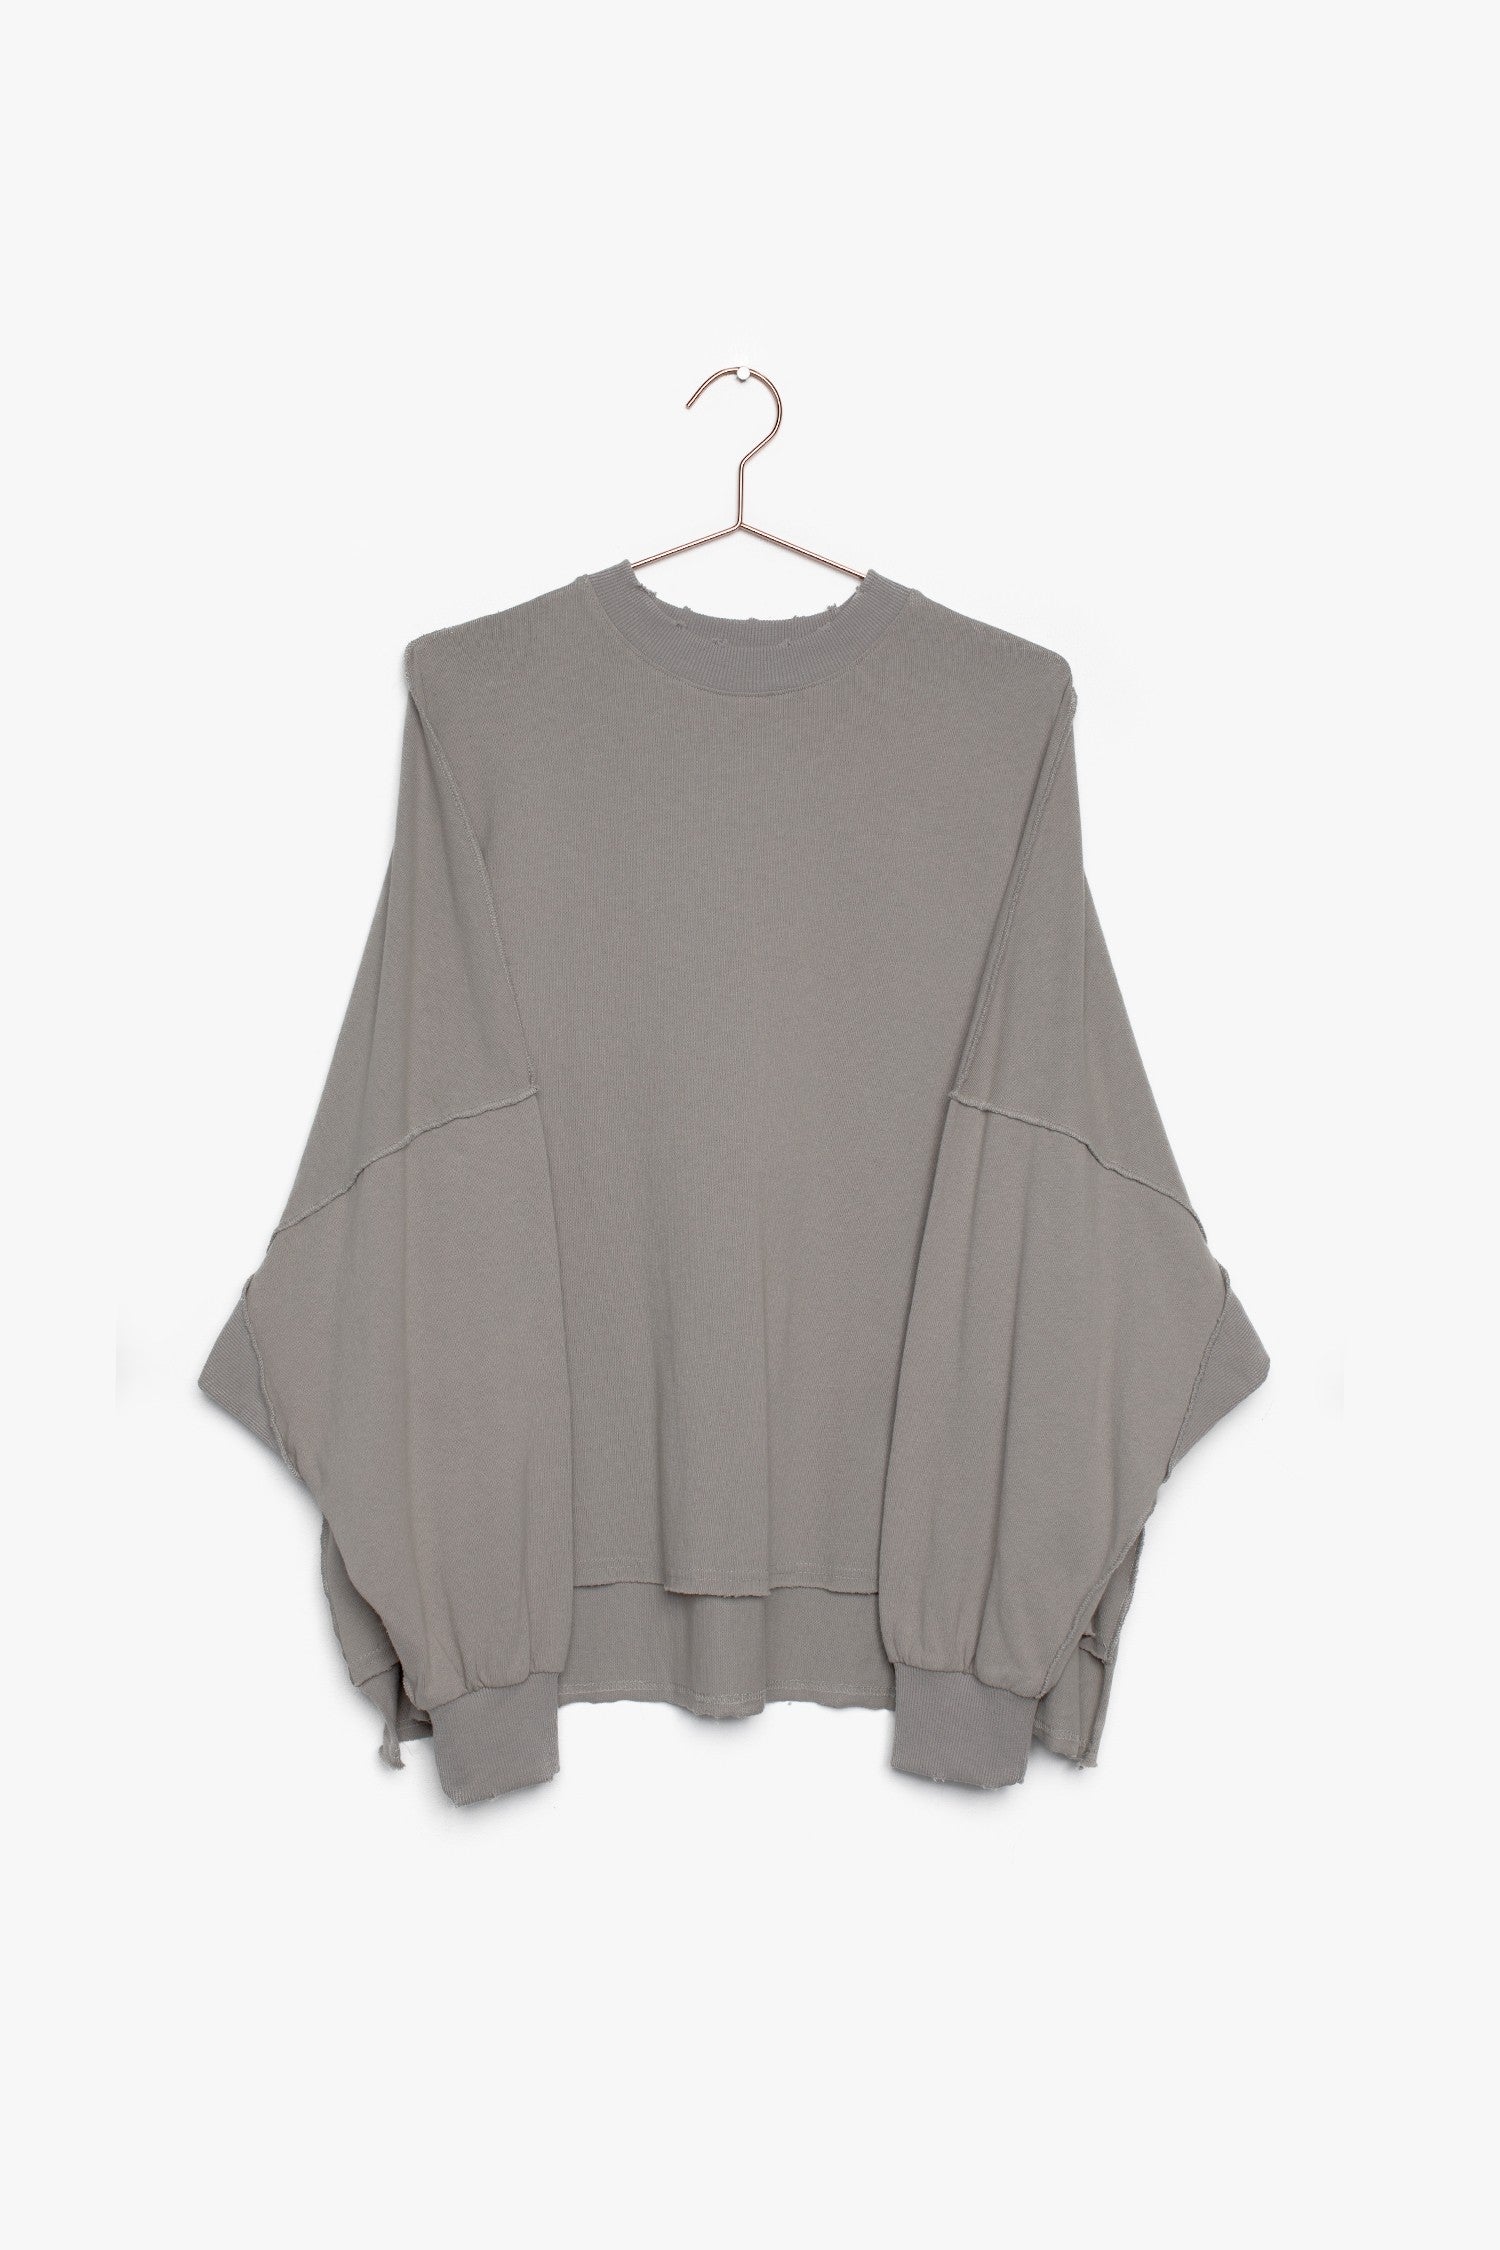 The Everson Top